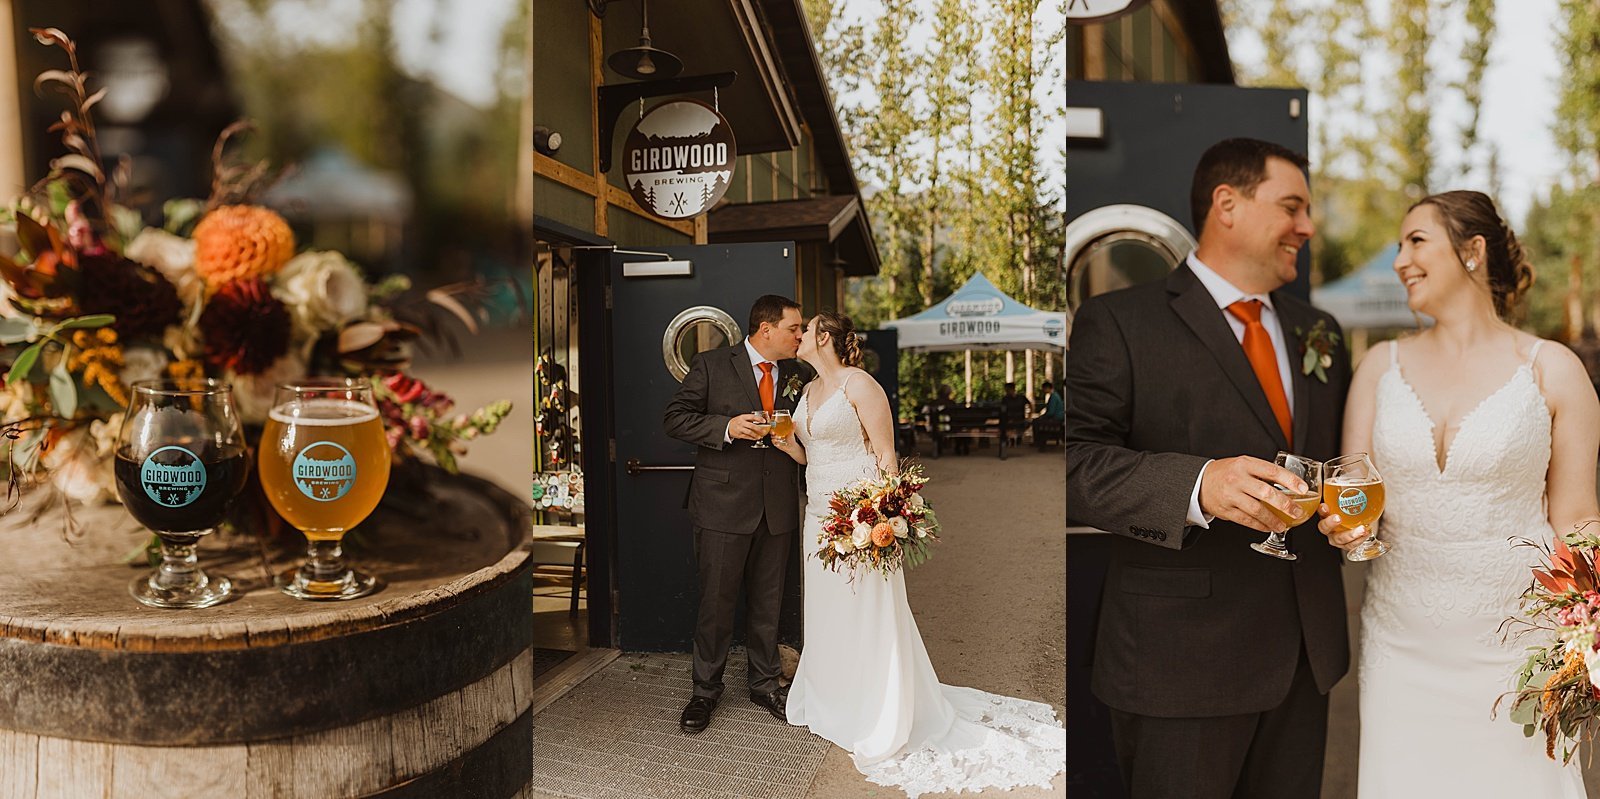  Wedding details for a Girdwood intimate family elopement 